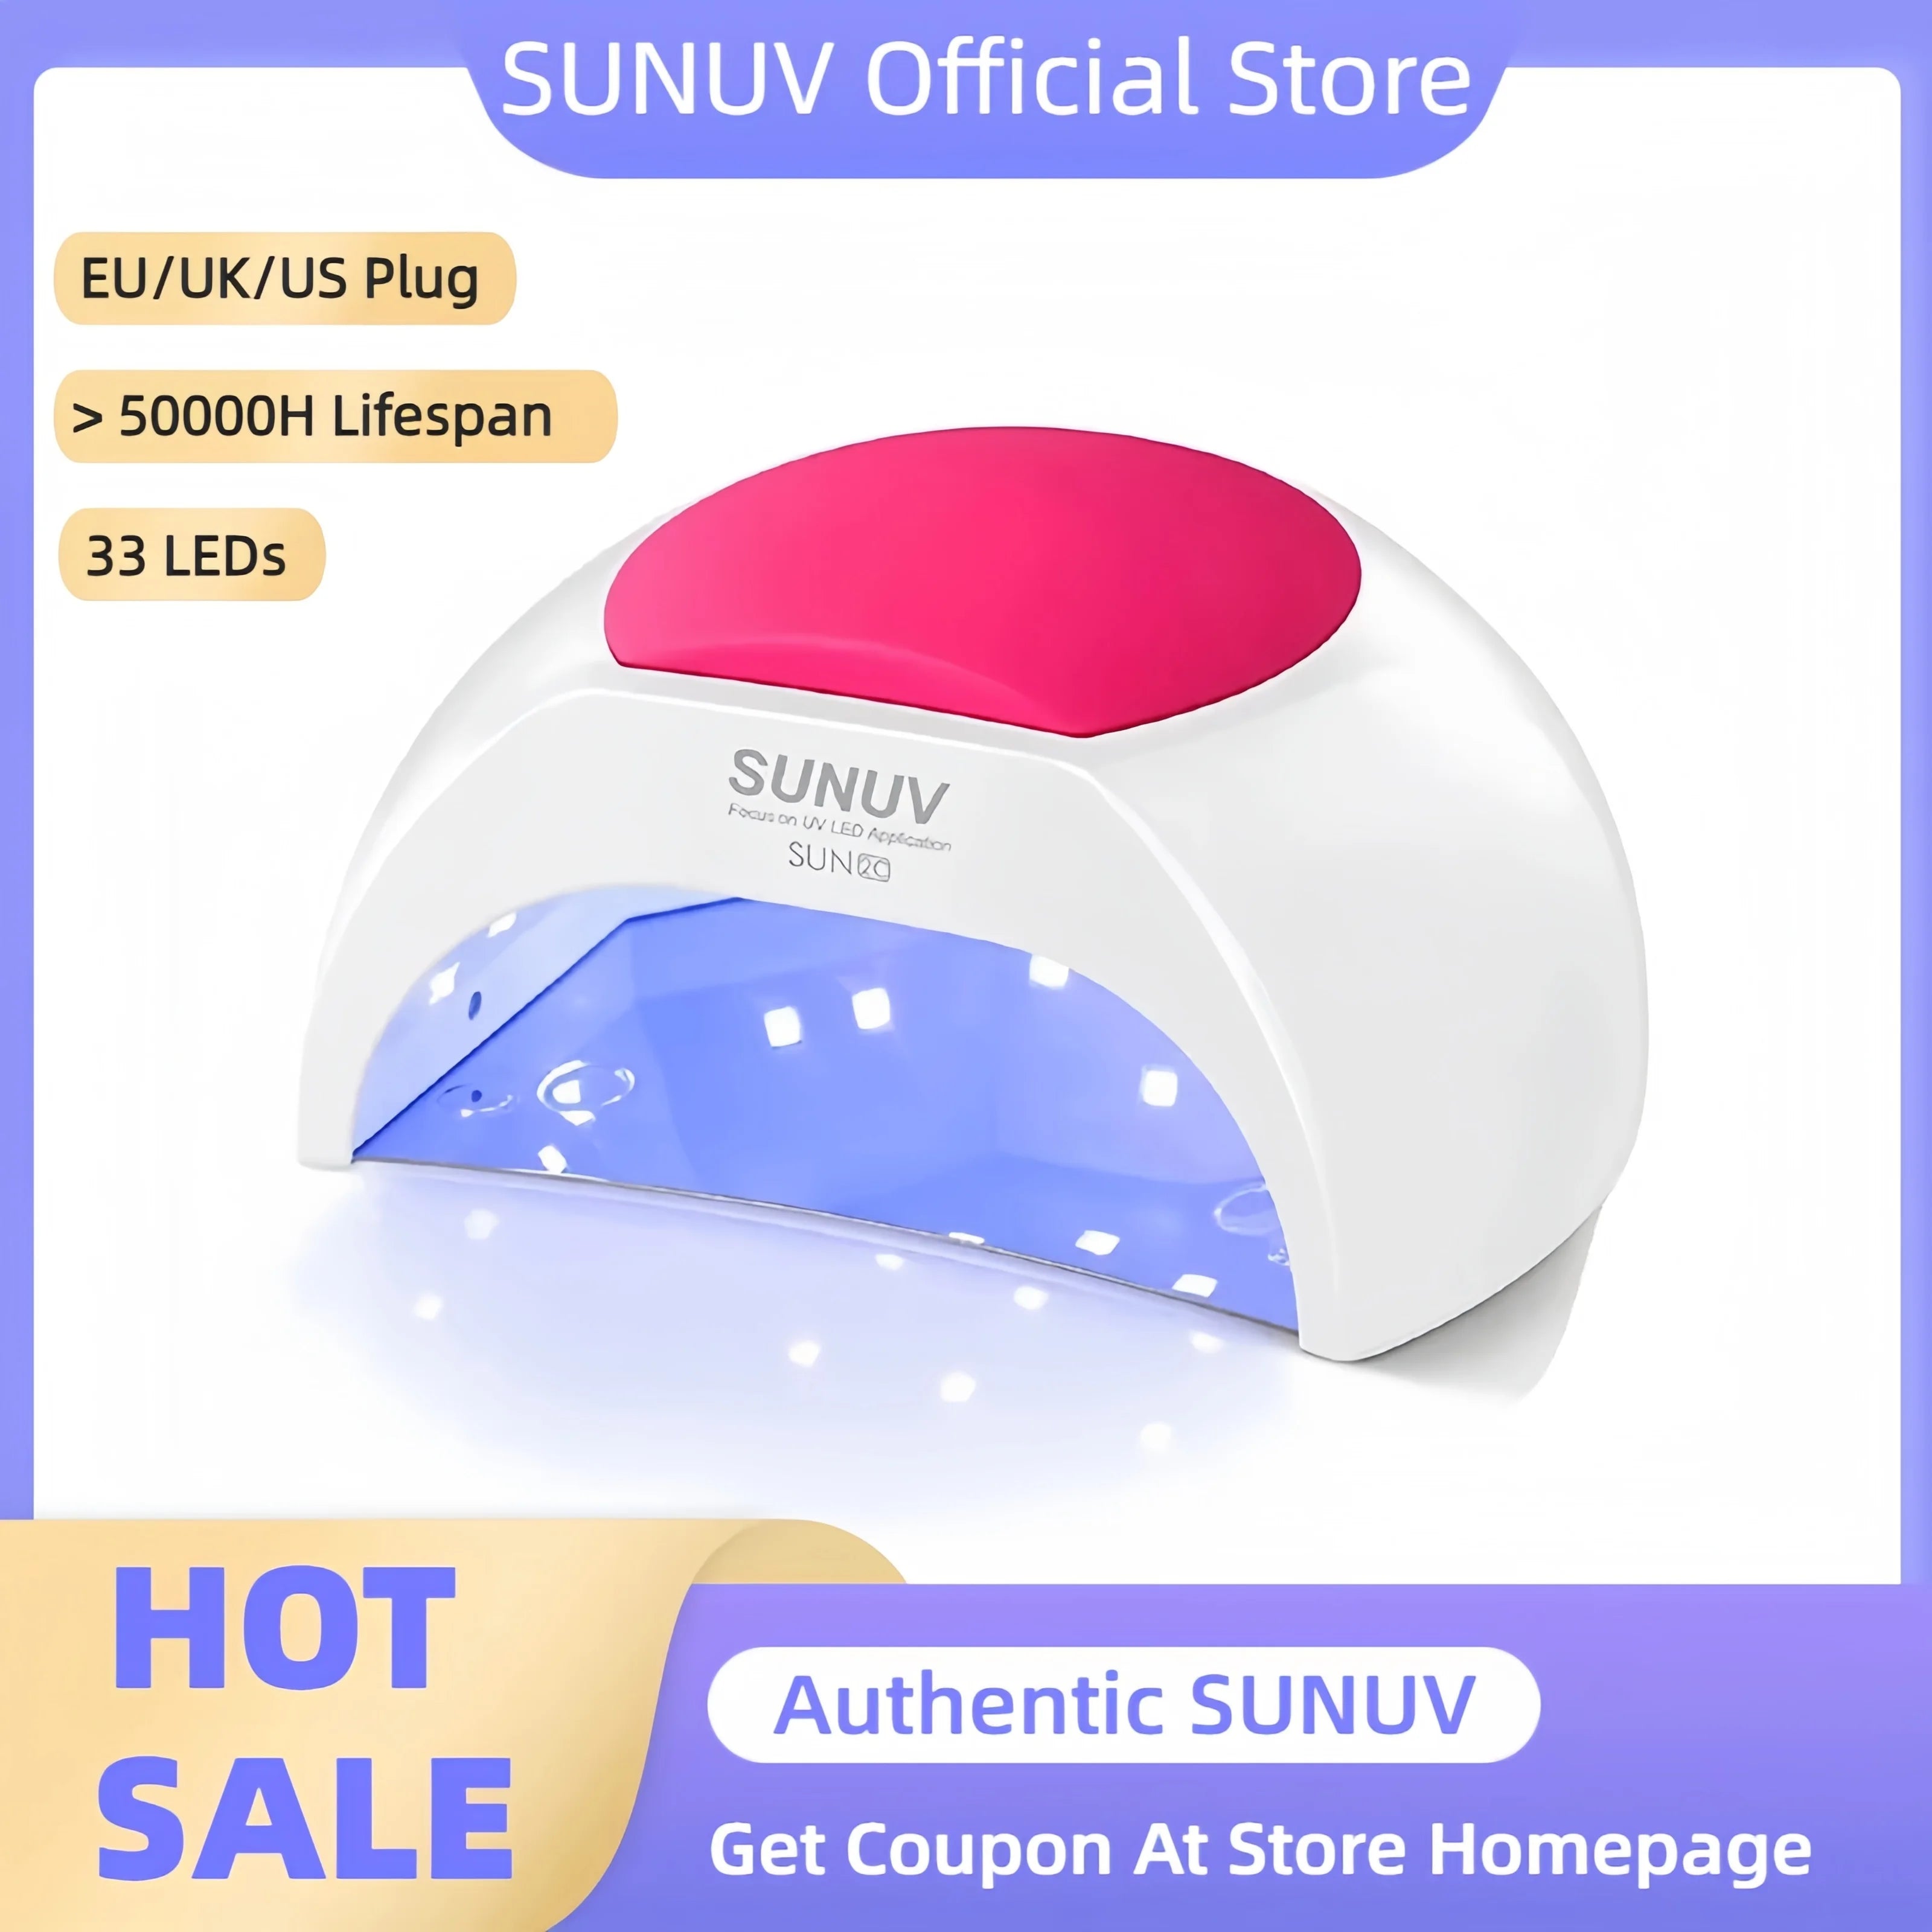 LuxeDry Nail Lamp - Professional UVLED Gel Nail Dryer